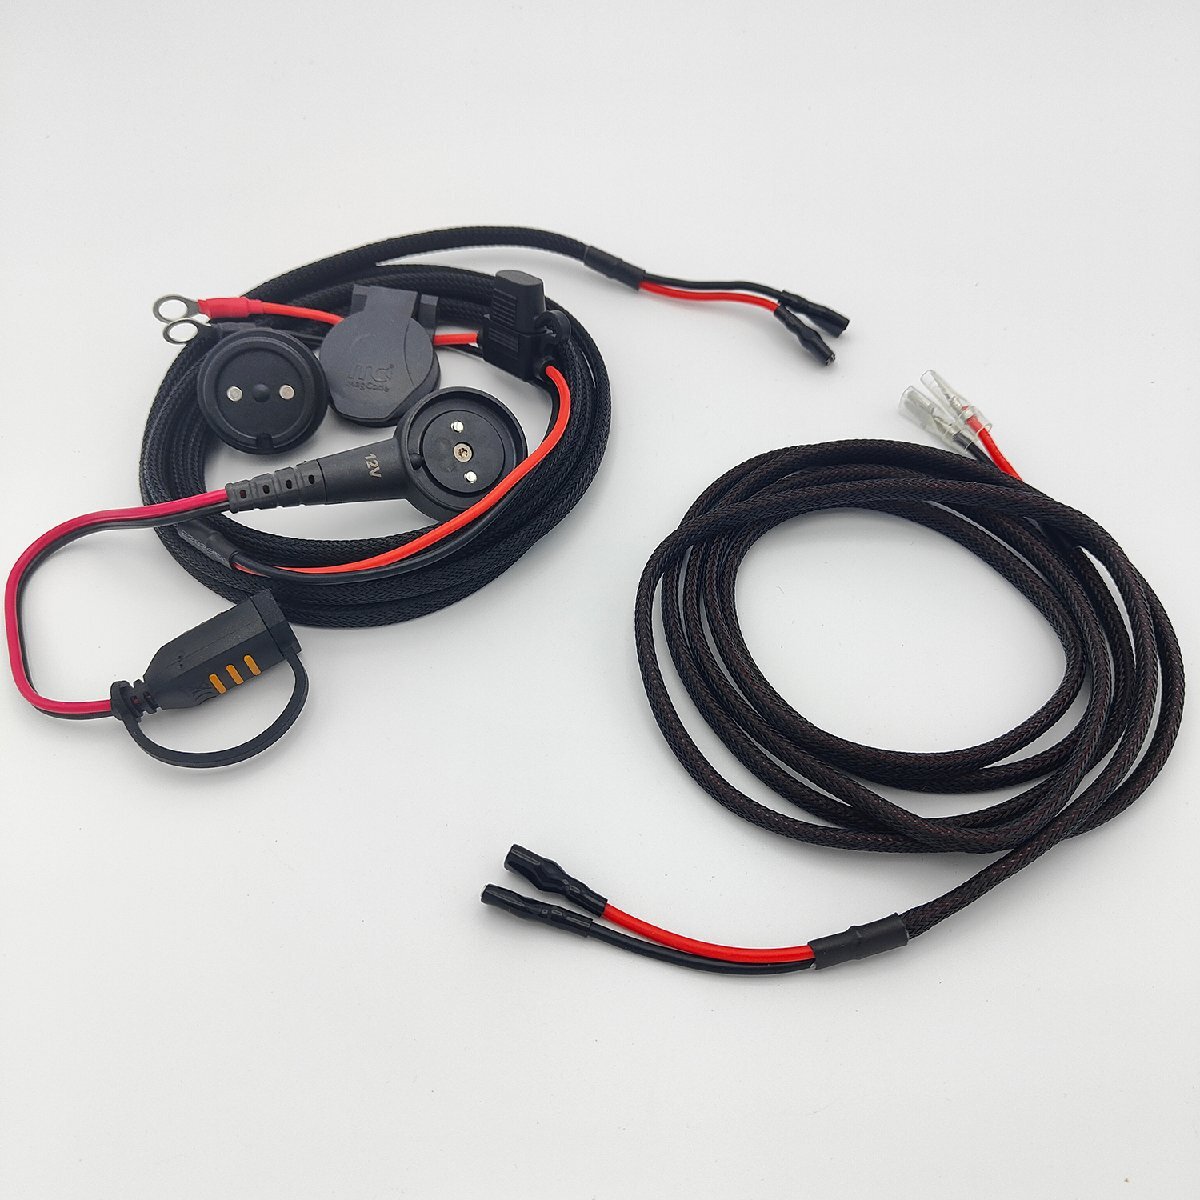 2 meter * extension Harness ( magnet charge terminal install * kit for addition Harness )